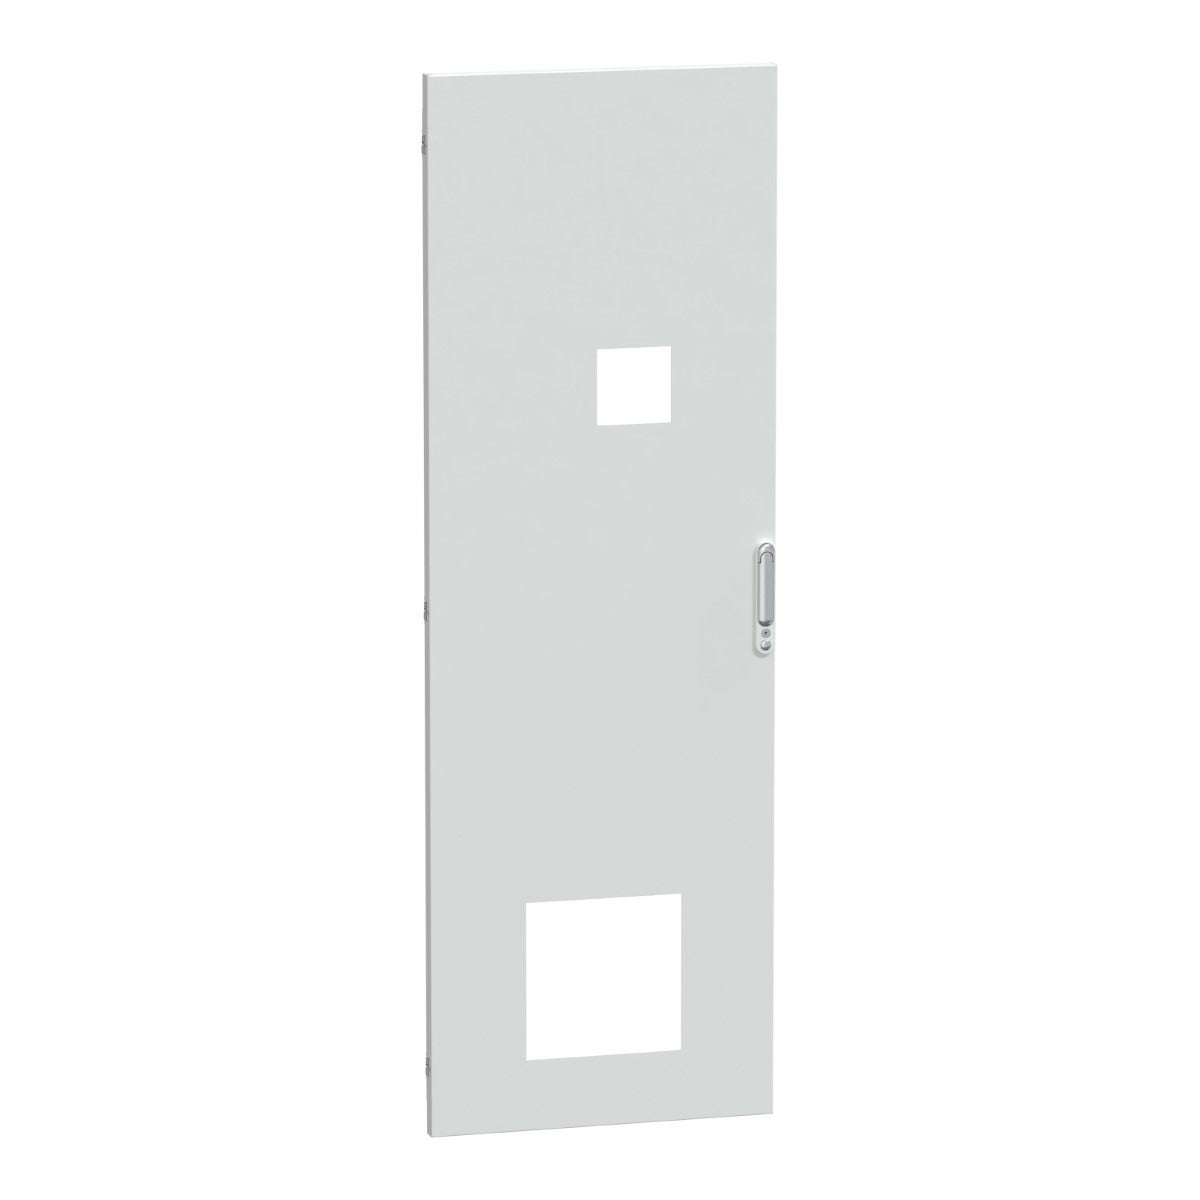 Door, PrismaSeT P, for capacitor floor-standing enclosure, 36M, W650, cut-out, IP30, white, RAL 9003